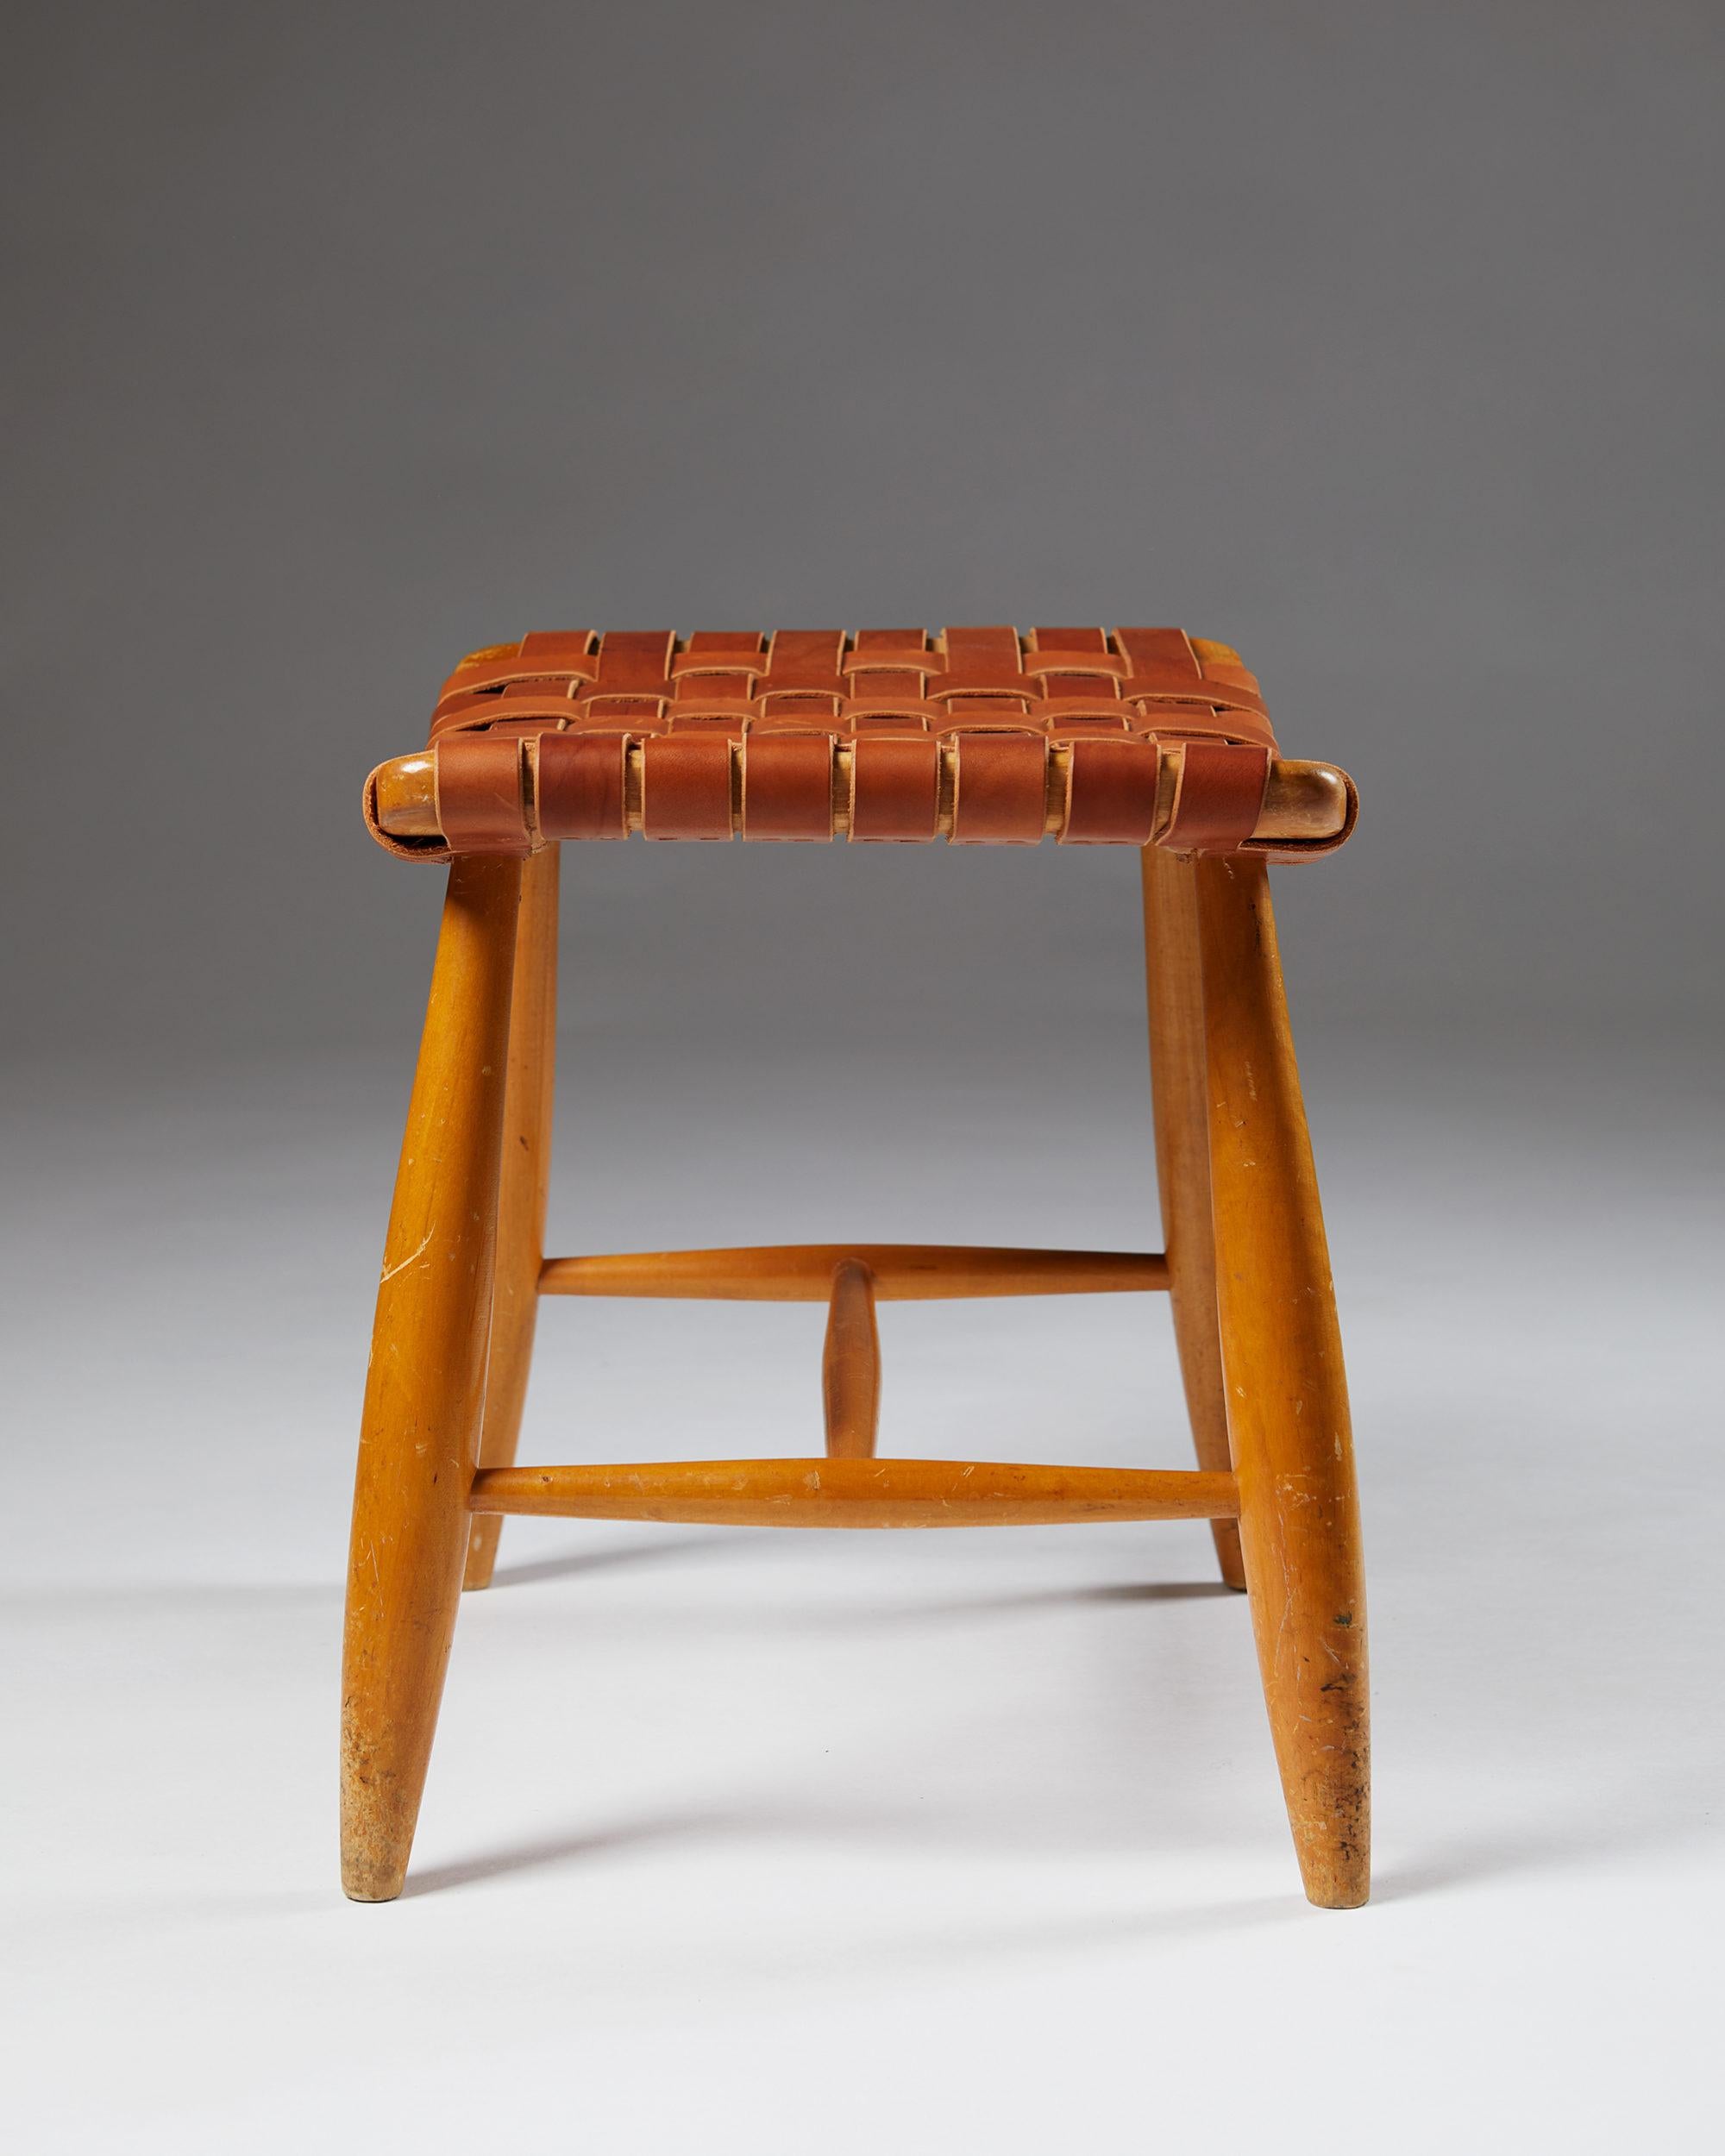 Stool, anonymous,
Sweden, 1950s.
Birch and leather.

Measures: H 41 cm / 1' 4 1/5